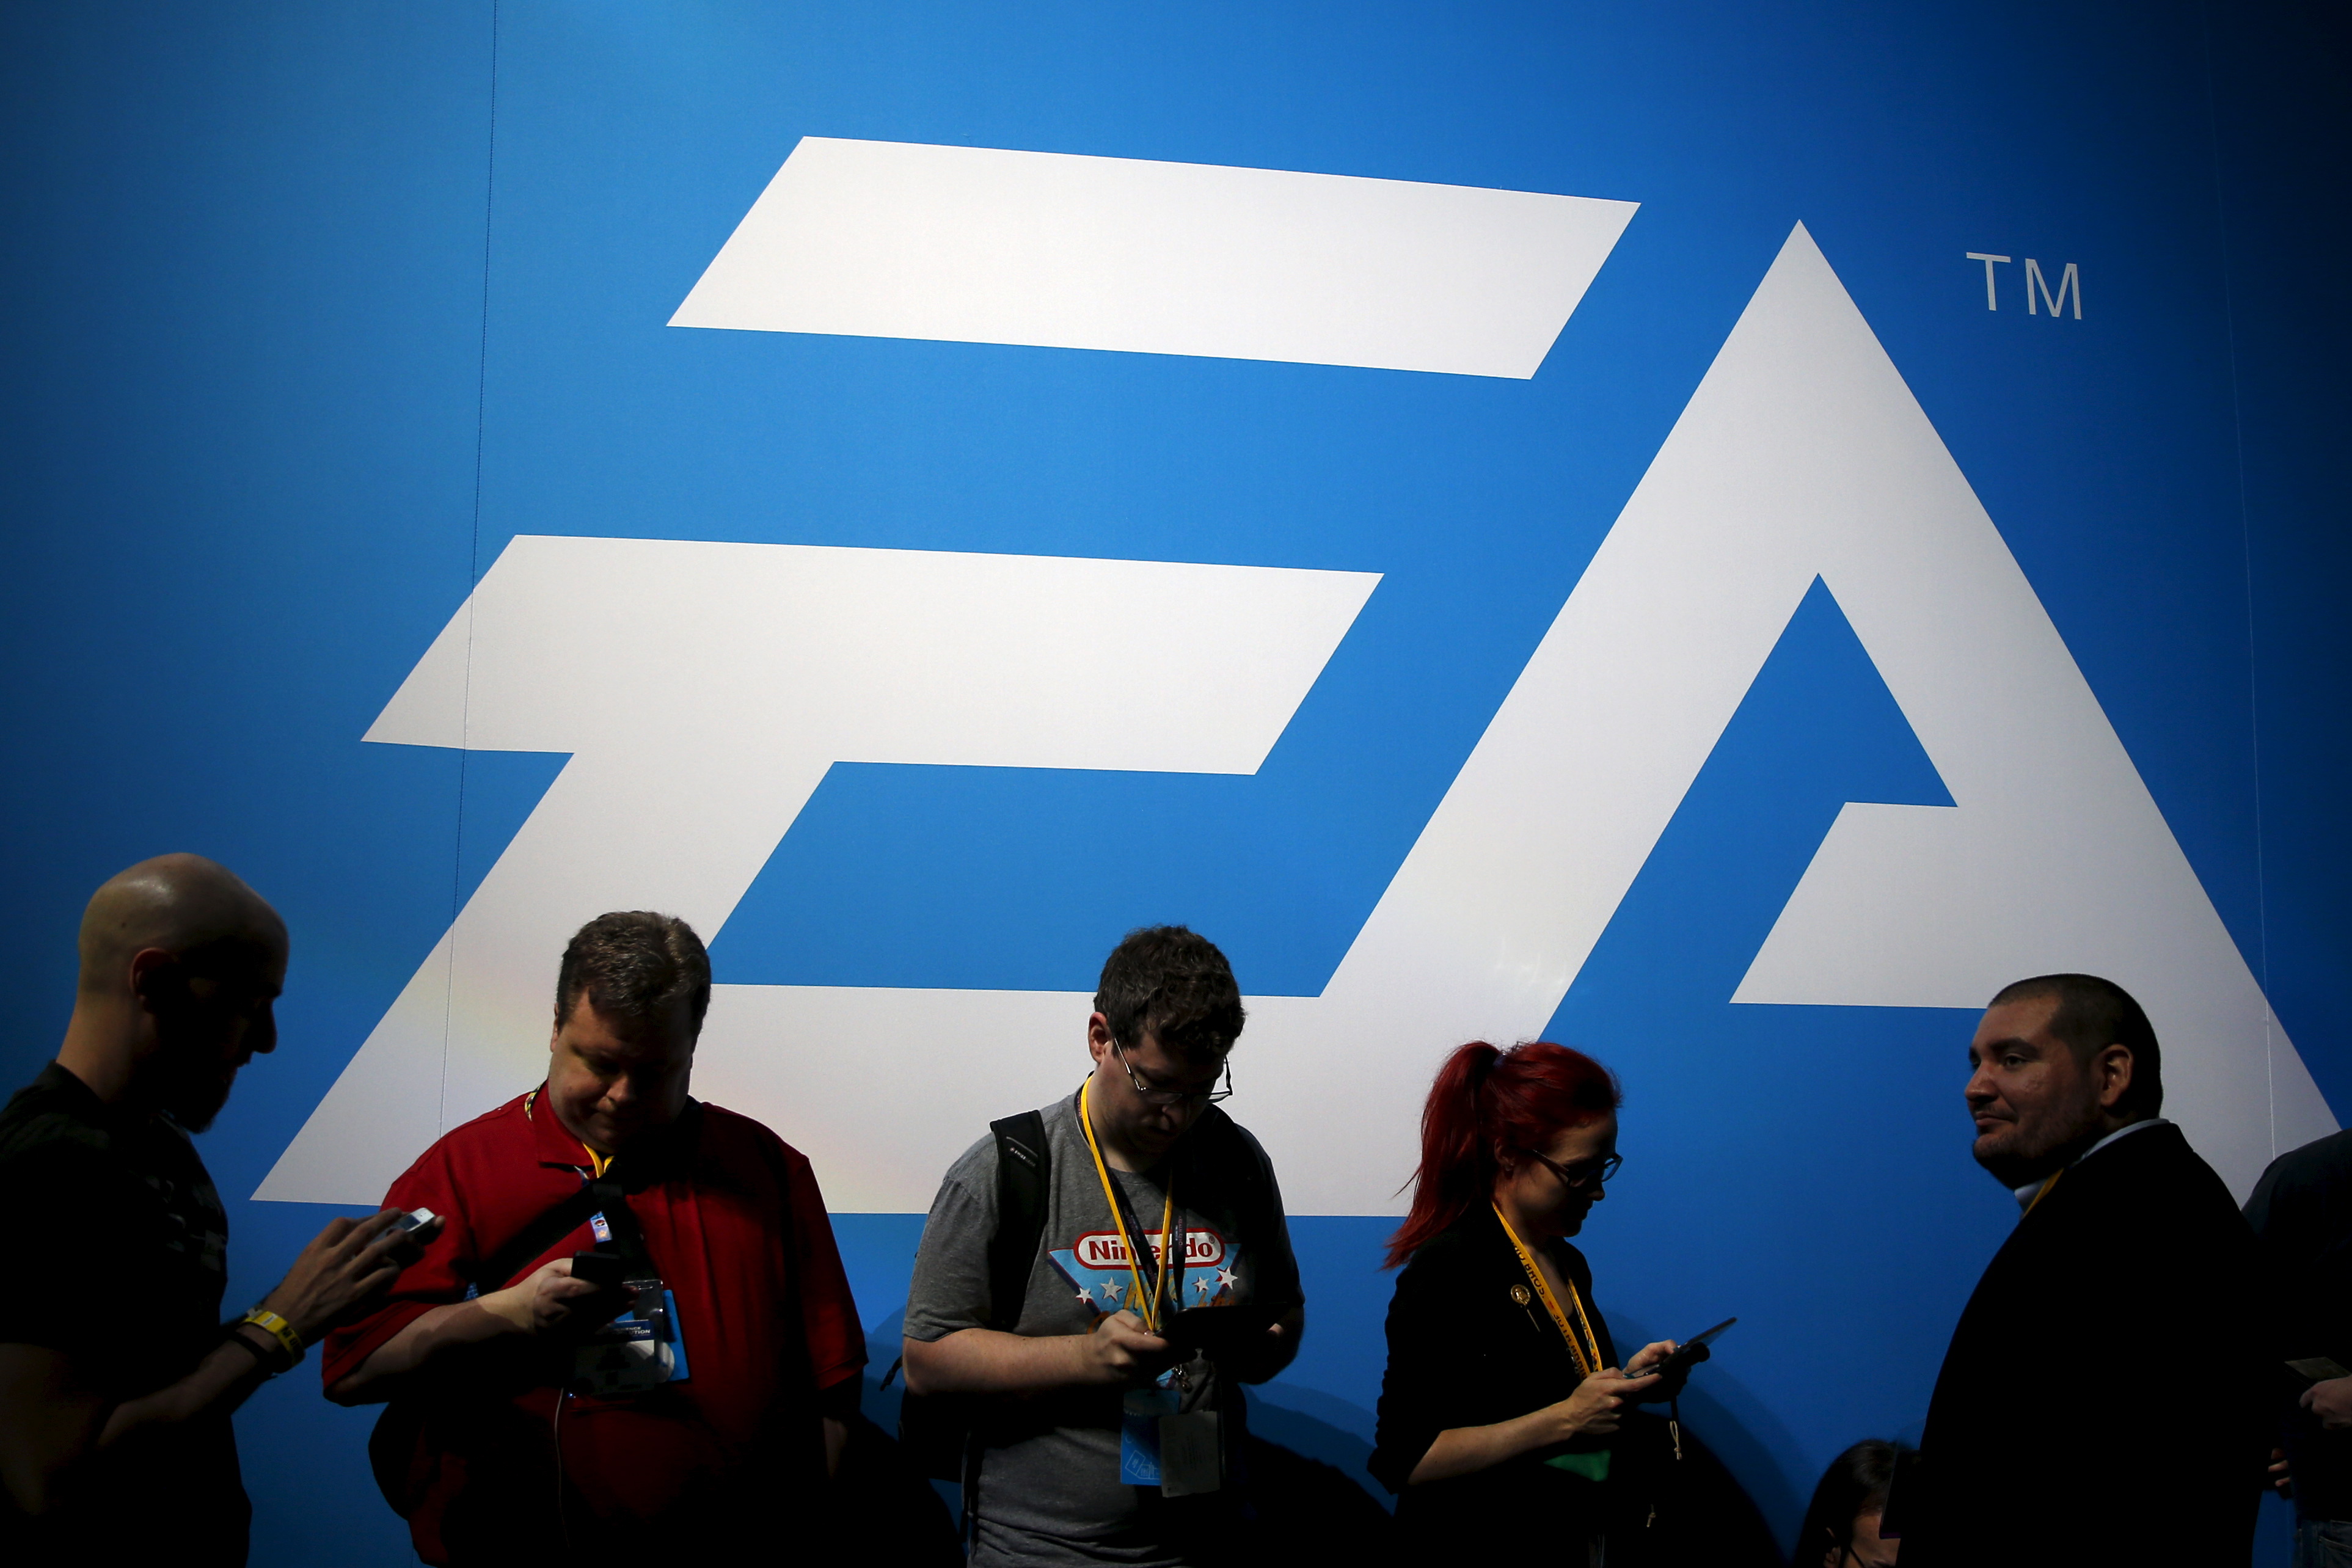 An Electronic Arts (EA) video game logo is seen at the Electronic Entertainment Expo, or E3, in Los Angeles